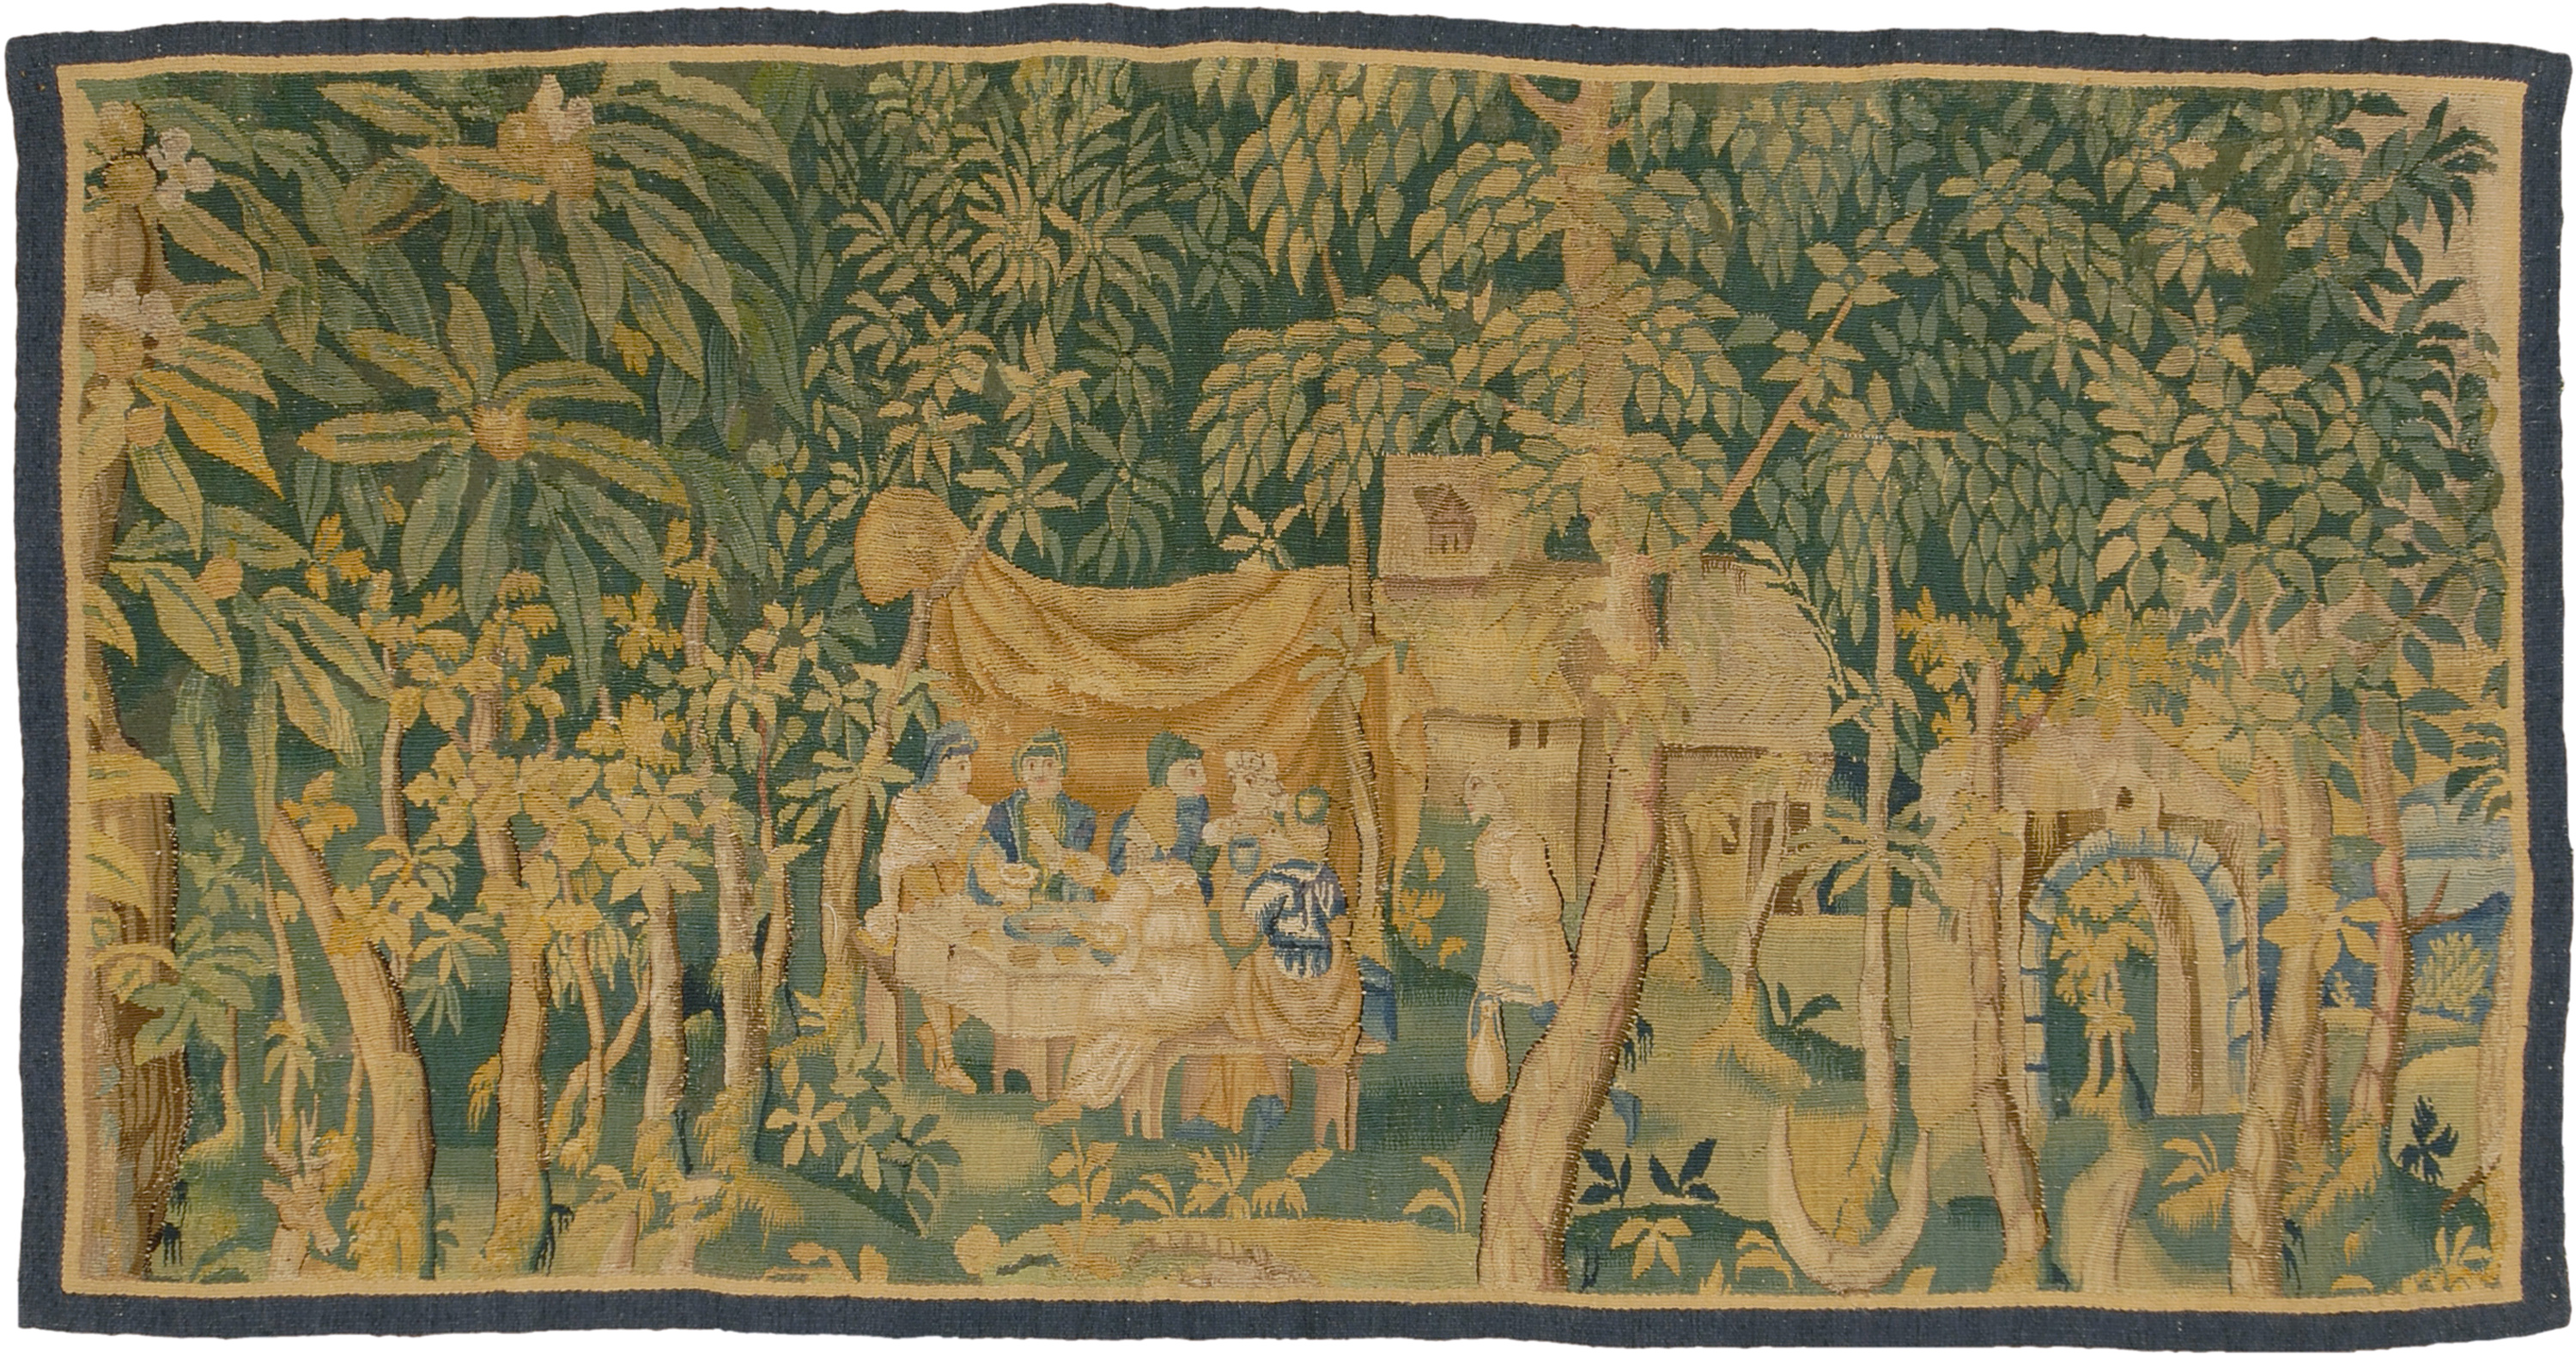 Antique French Tapestry | FJ Hakimian | Carpet Gallery in NYC